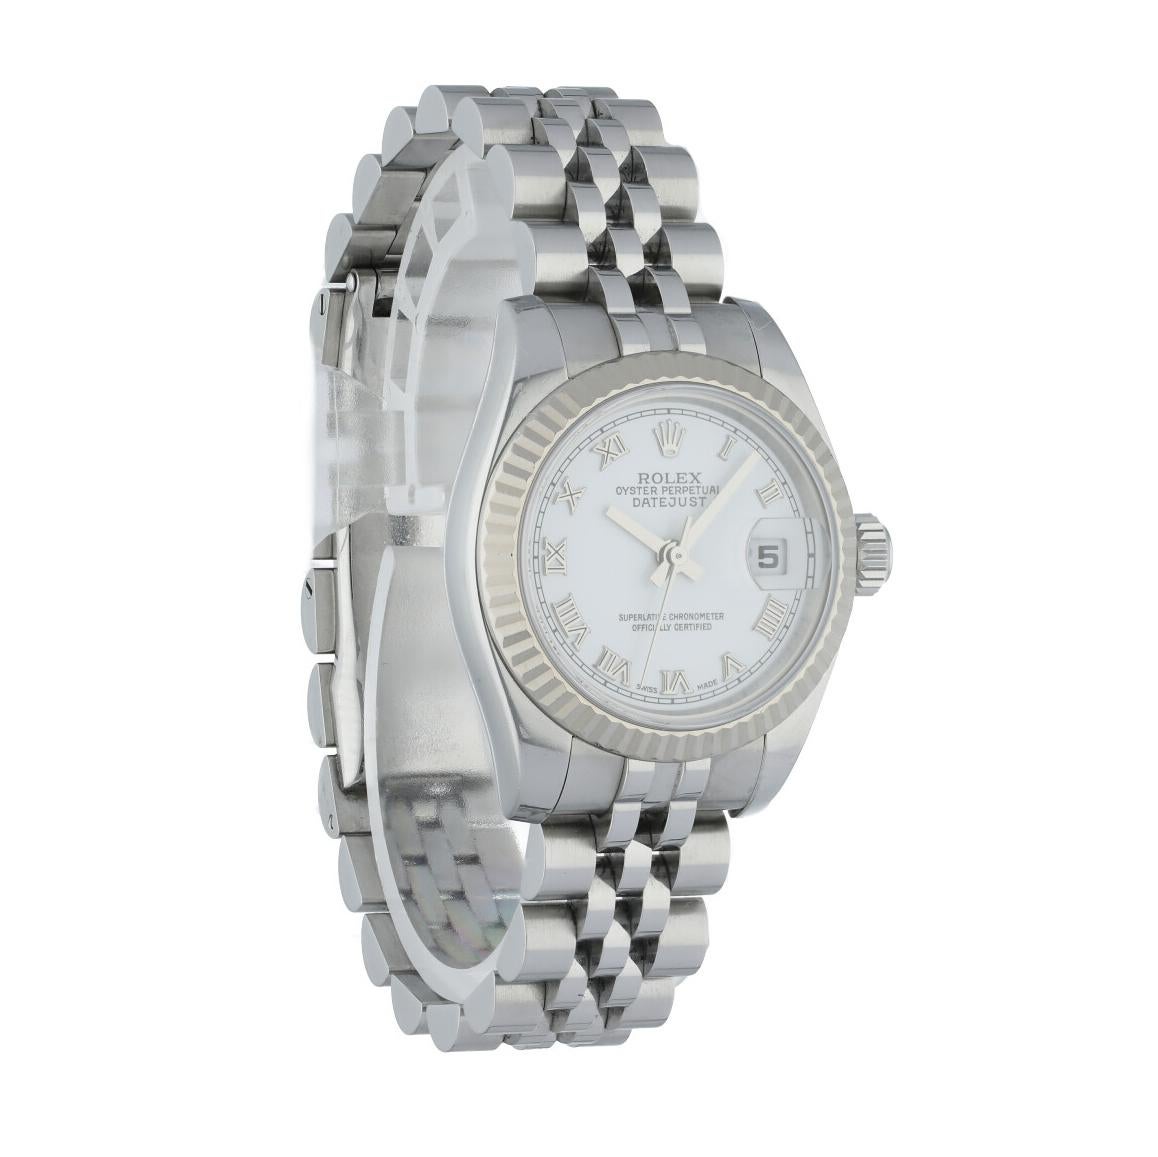 Rolex Oyster Perpetual Datejust 179174 Ladies Watch.
26mm Stainless Steel case. 
18K White gold fluted bezel. 
White dial with steel hands and Roman numeral hour markers. 
Minute markers on the outer dial. 
Date display at the 3 o'clock position.